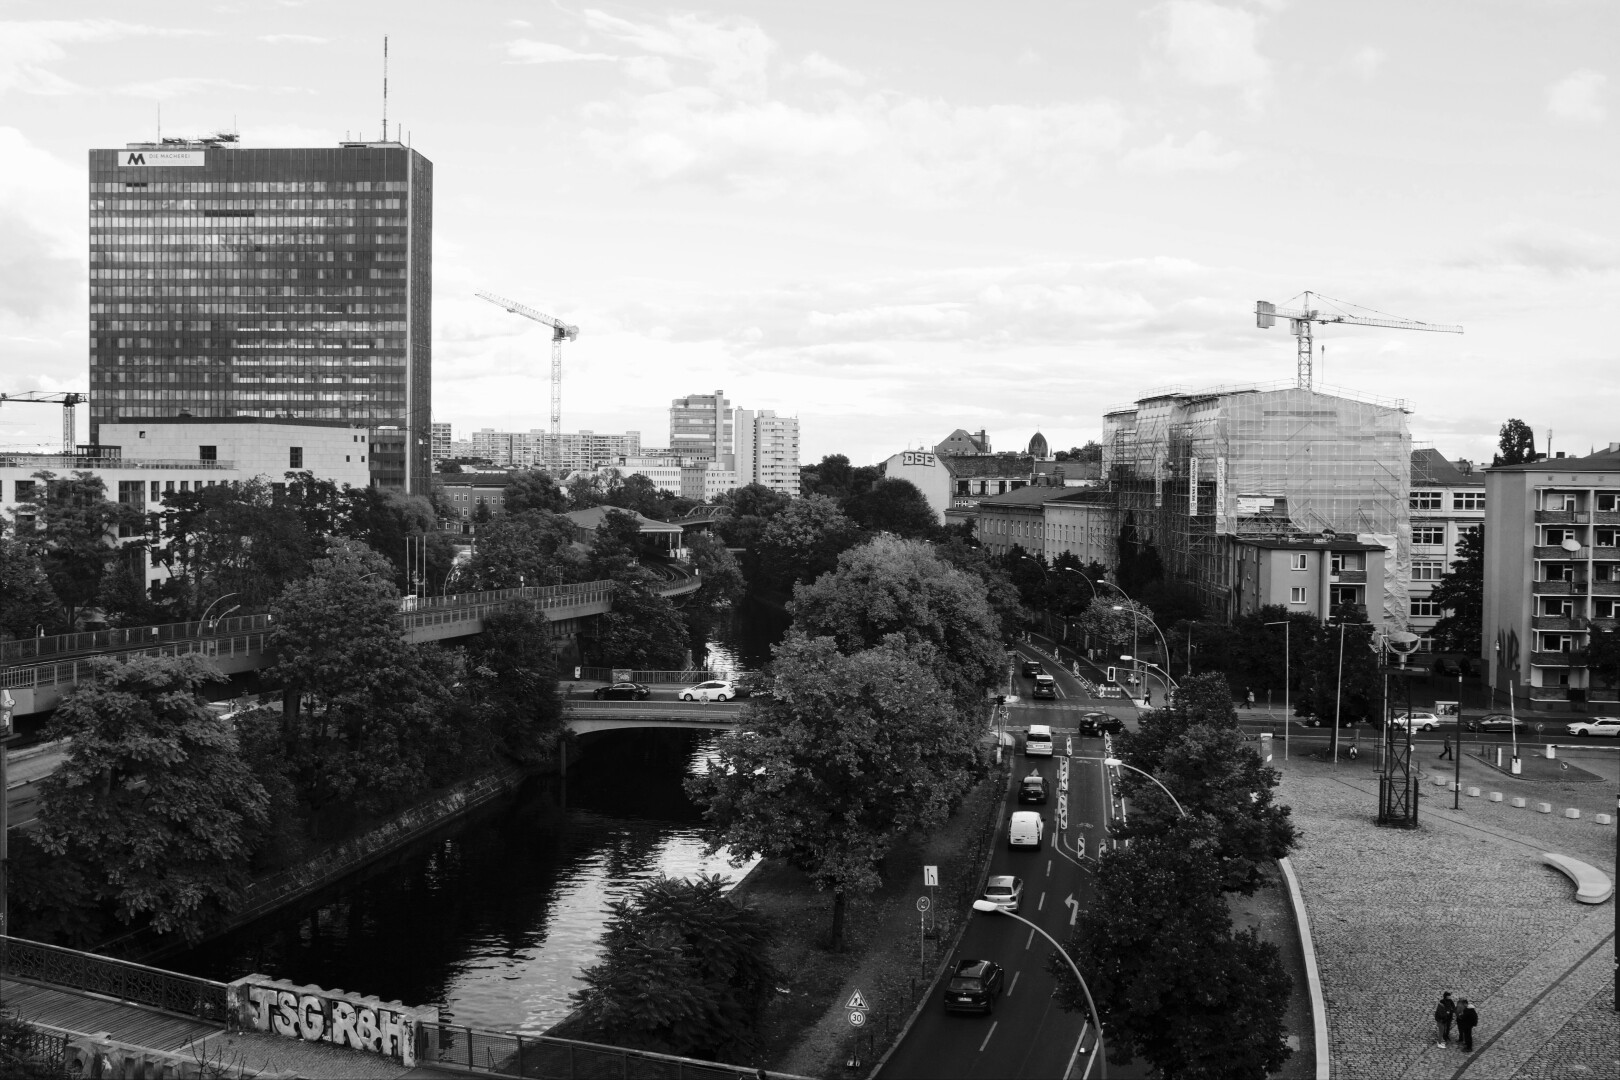 A photo taken in Berlin-Kreuzberg, showing a street with some tiny cars, a river and some typical buildings.